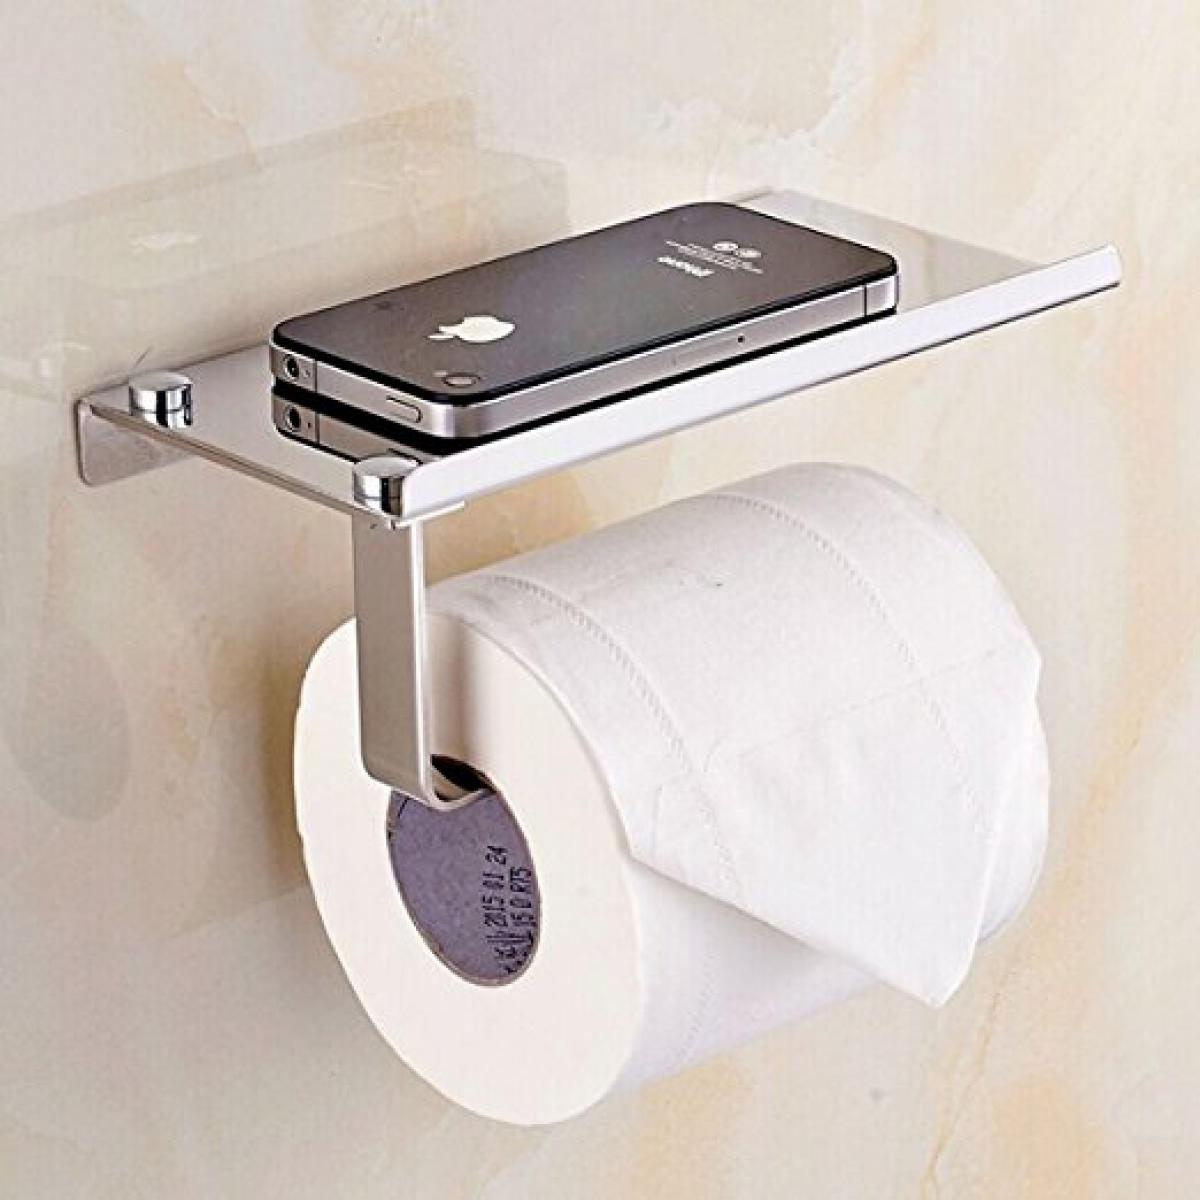 Wall Mount Toilet Paper Holder